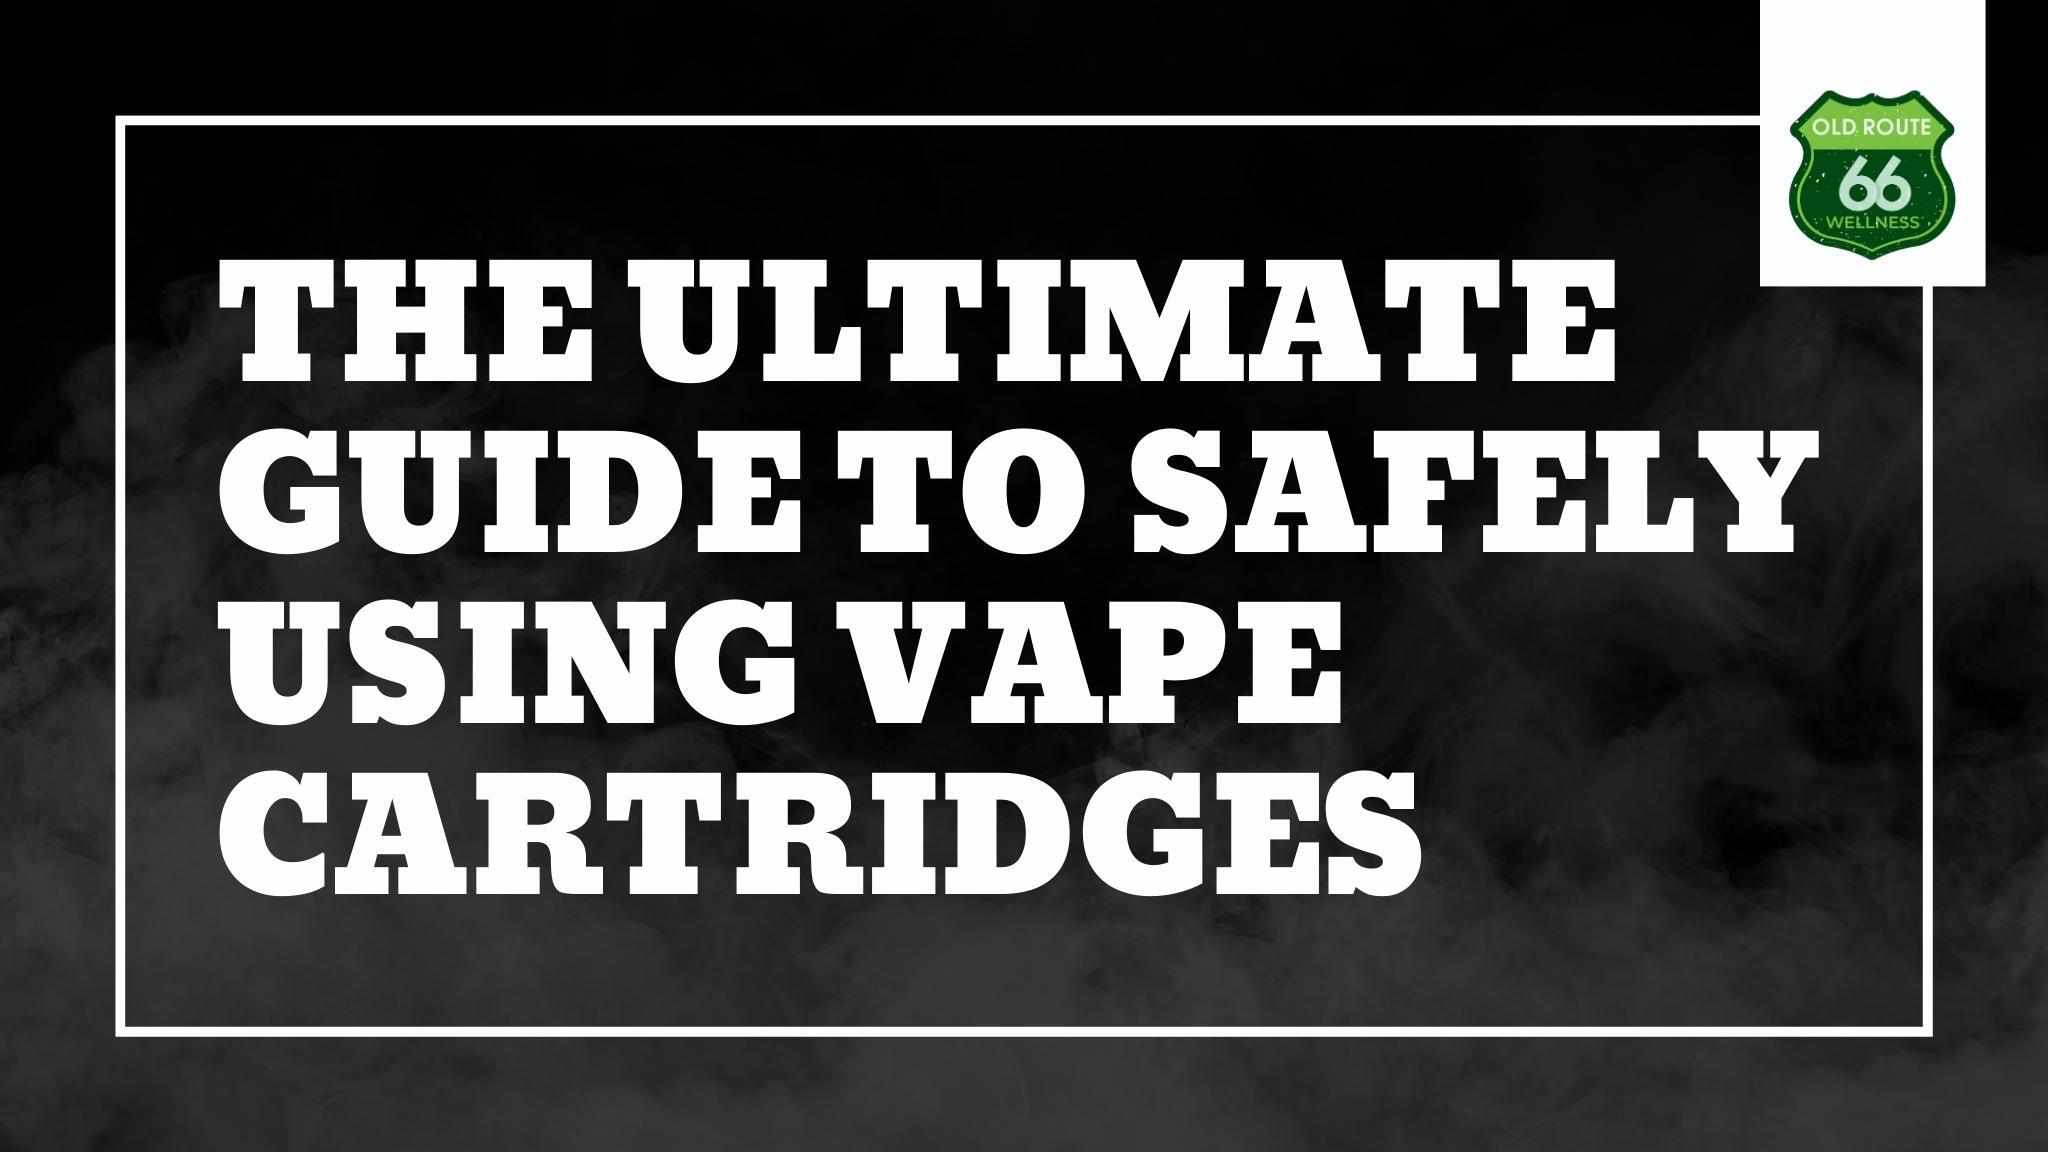 The Ultimate Guide to Safely Using Cannabis Vape Cartridges